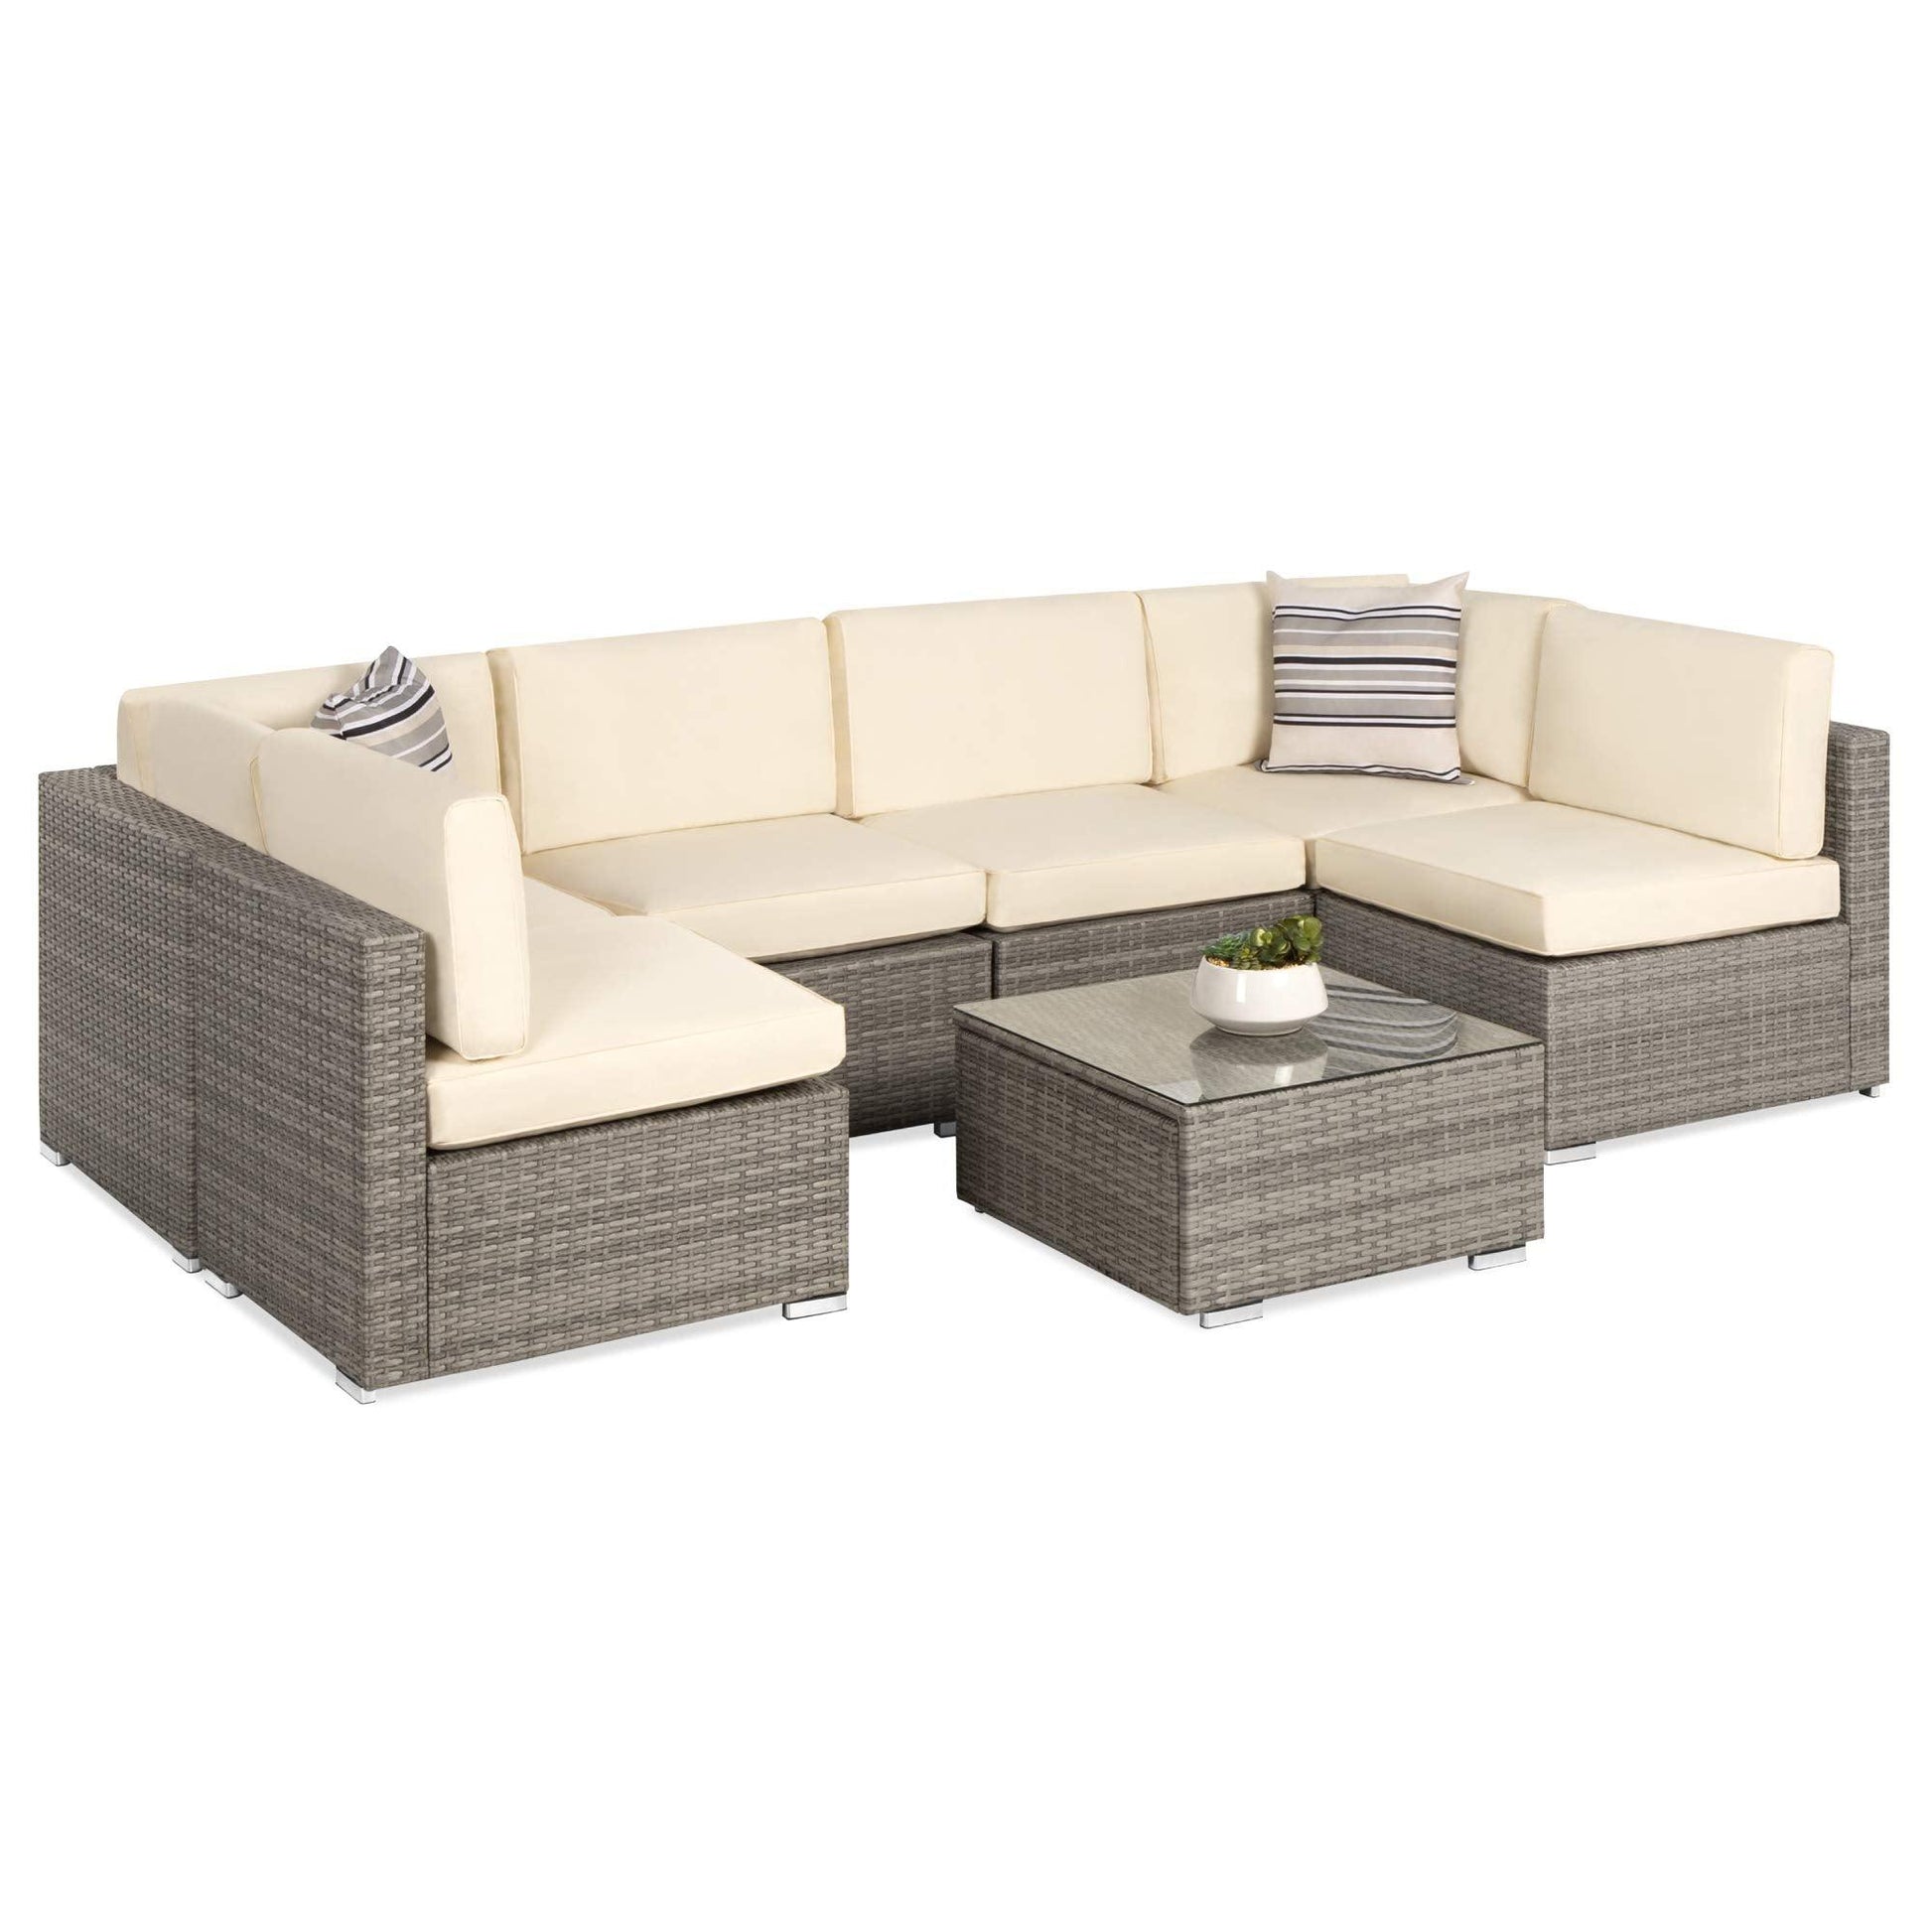 Best Choice Products 7-Piece Modular Outdoor Sectional Wicker Patio Furniture Conversation Sofa Set w/ 6 Chairs, 2 Pillows, Seat Clips, Coffee Table, Cover Included - Gray/Cream - CookCave